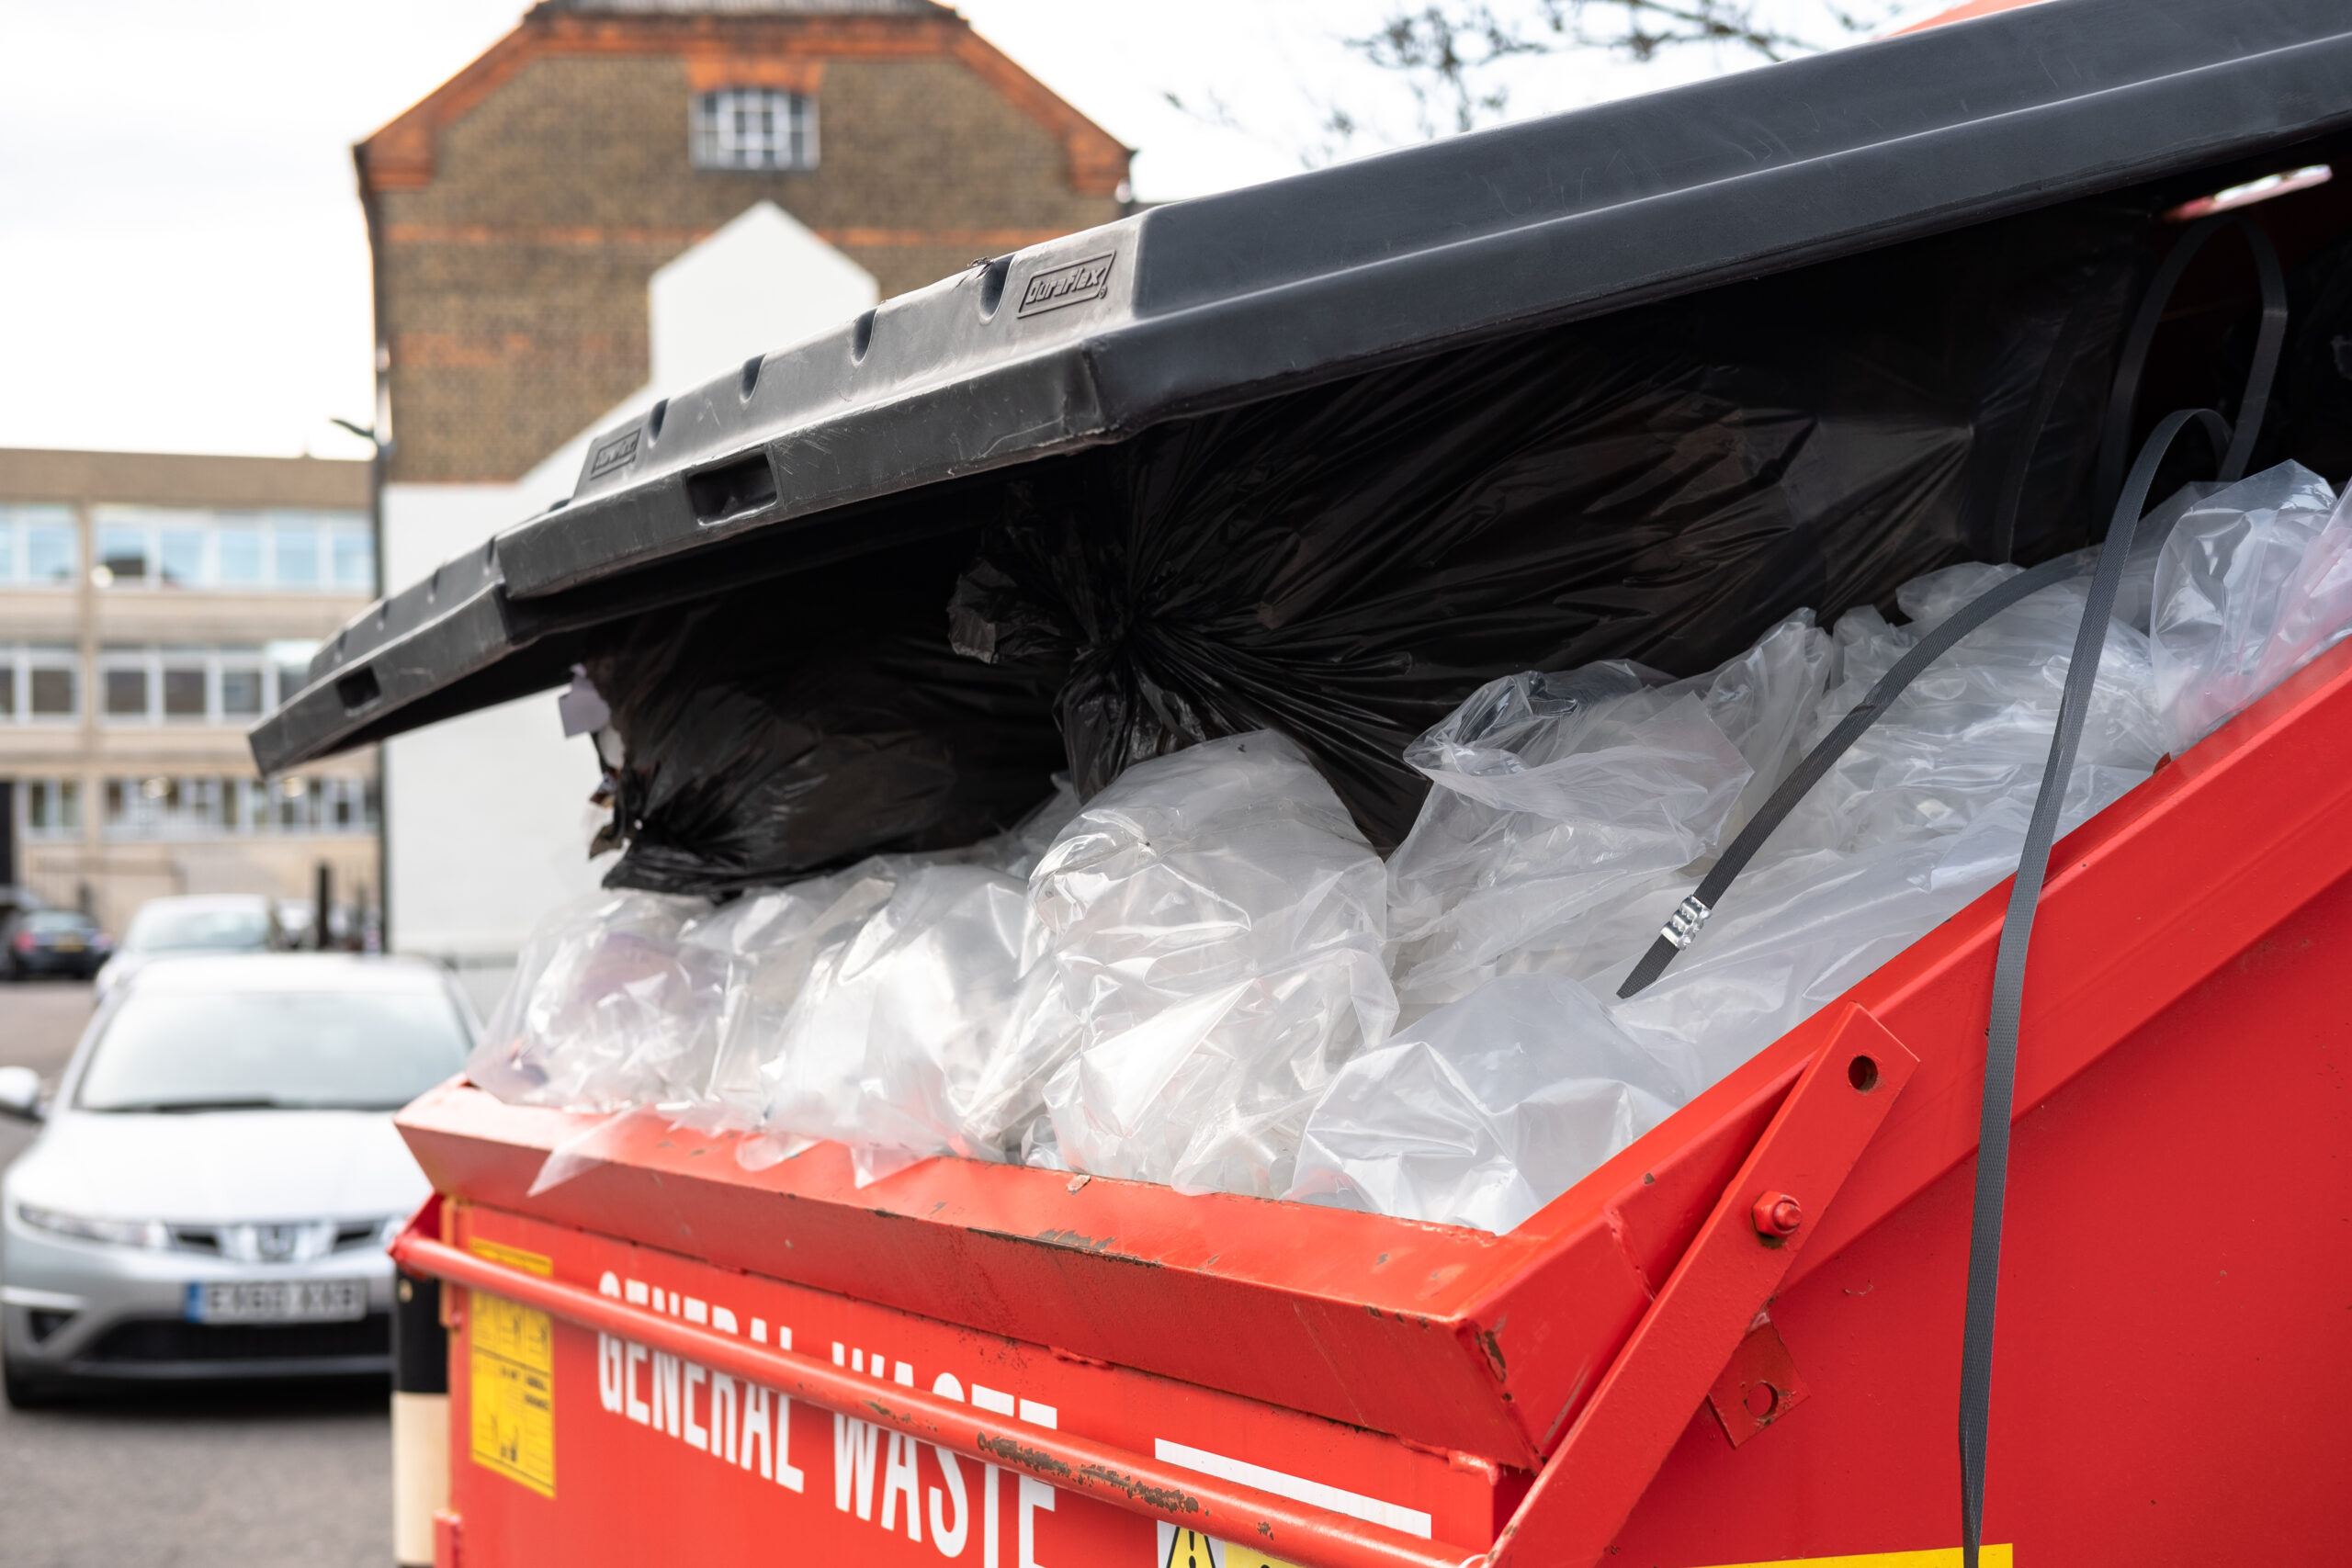 Plastic packaging in the UK housing sector